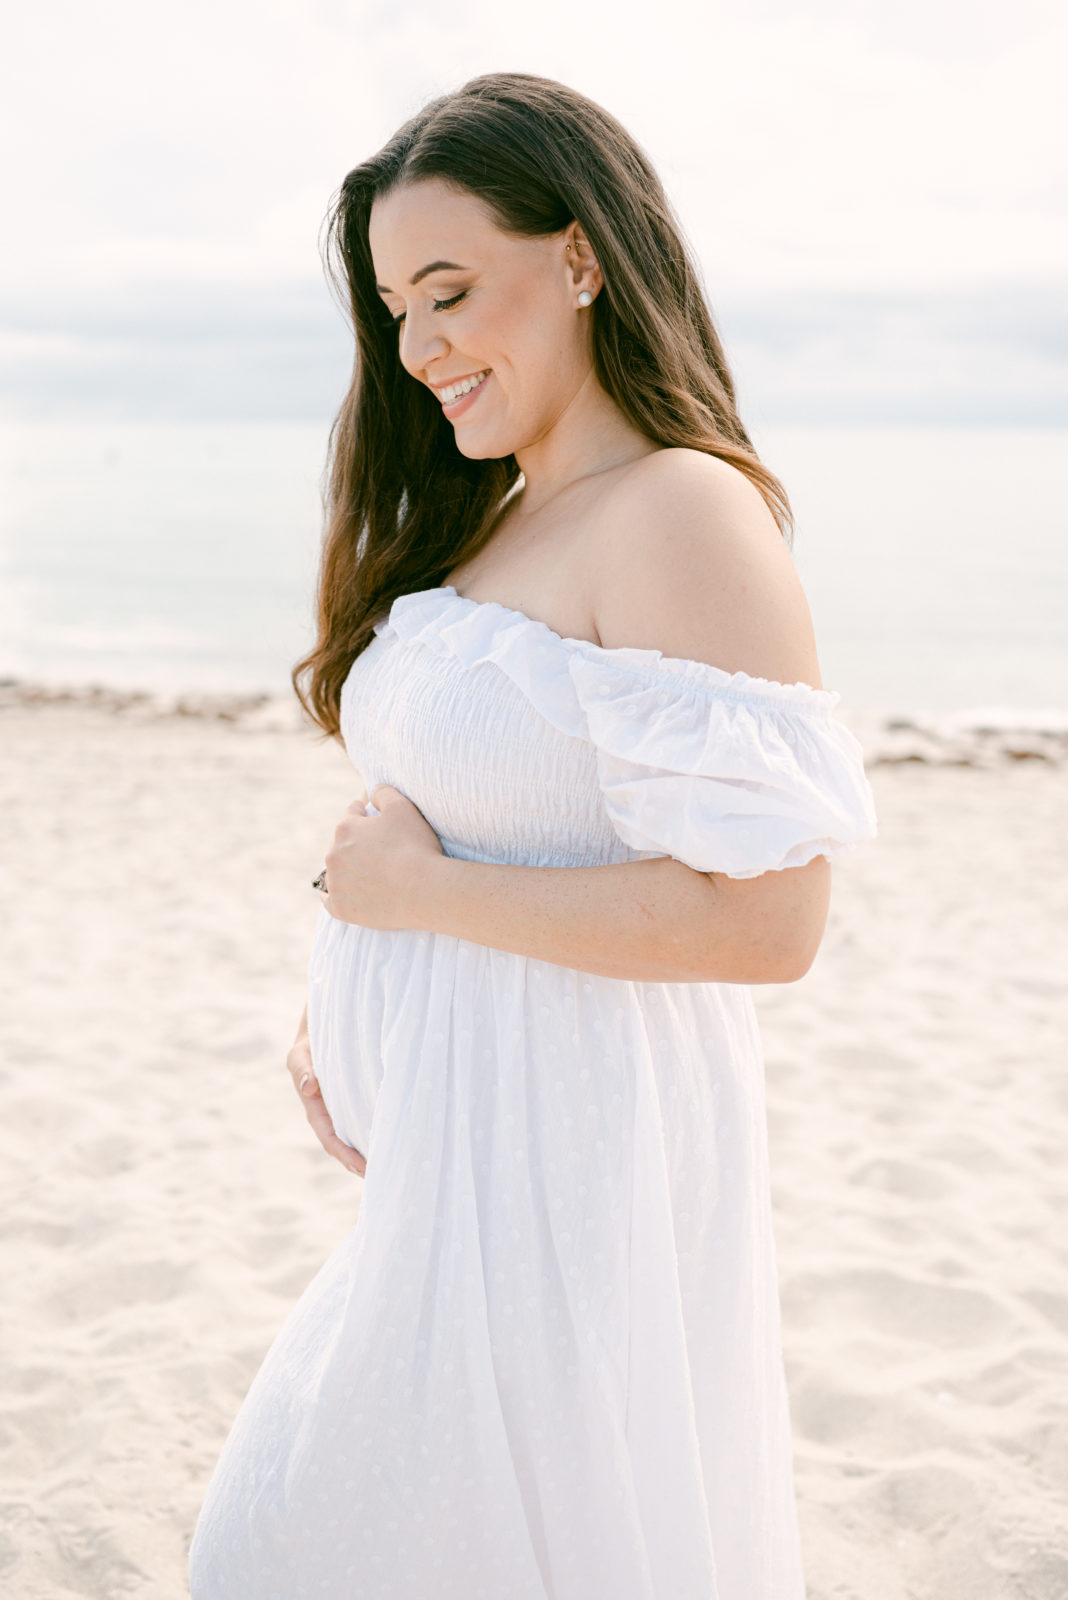 Early pregnancy photo on the beach